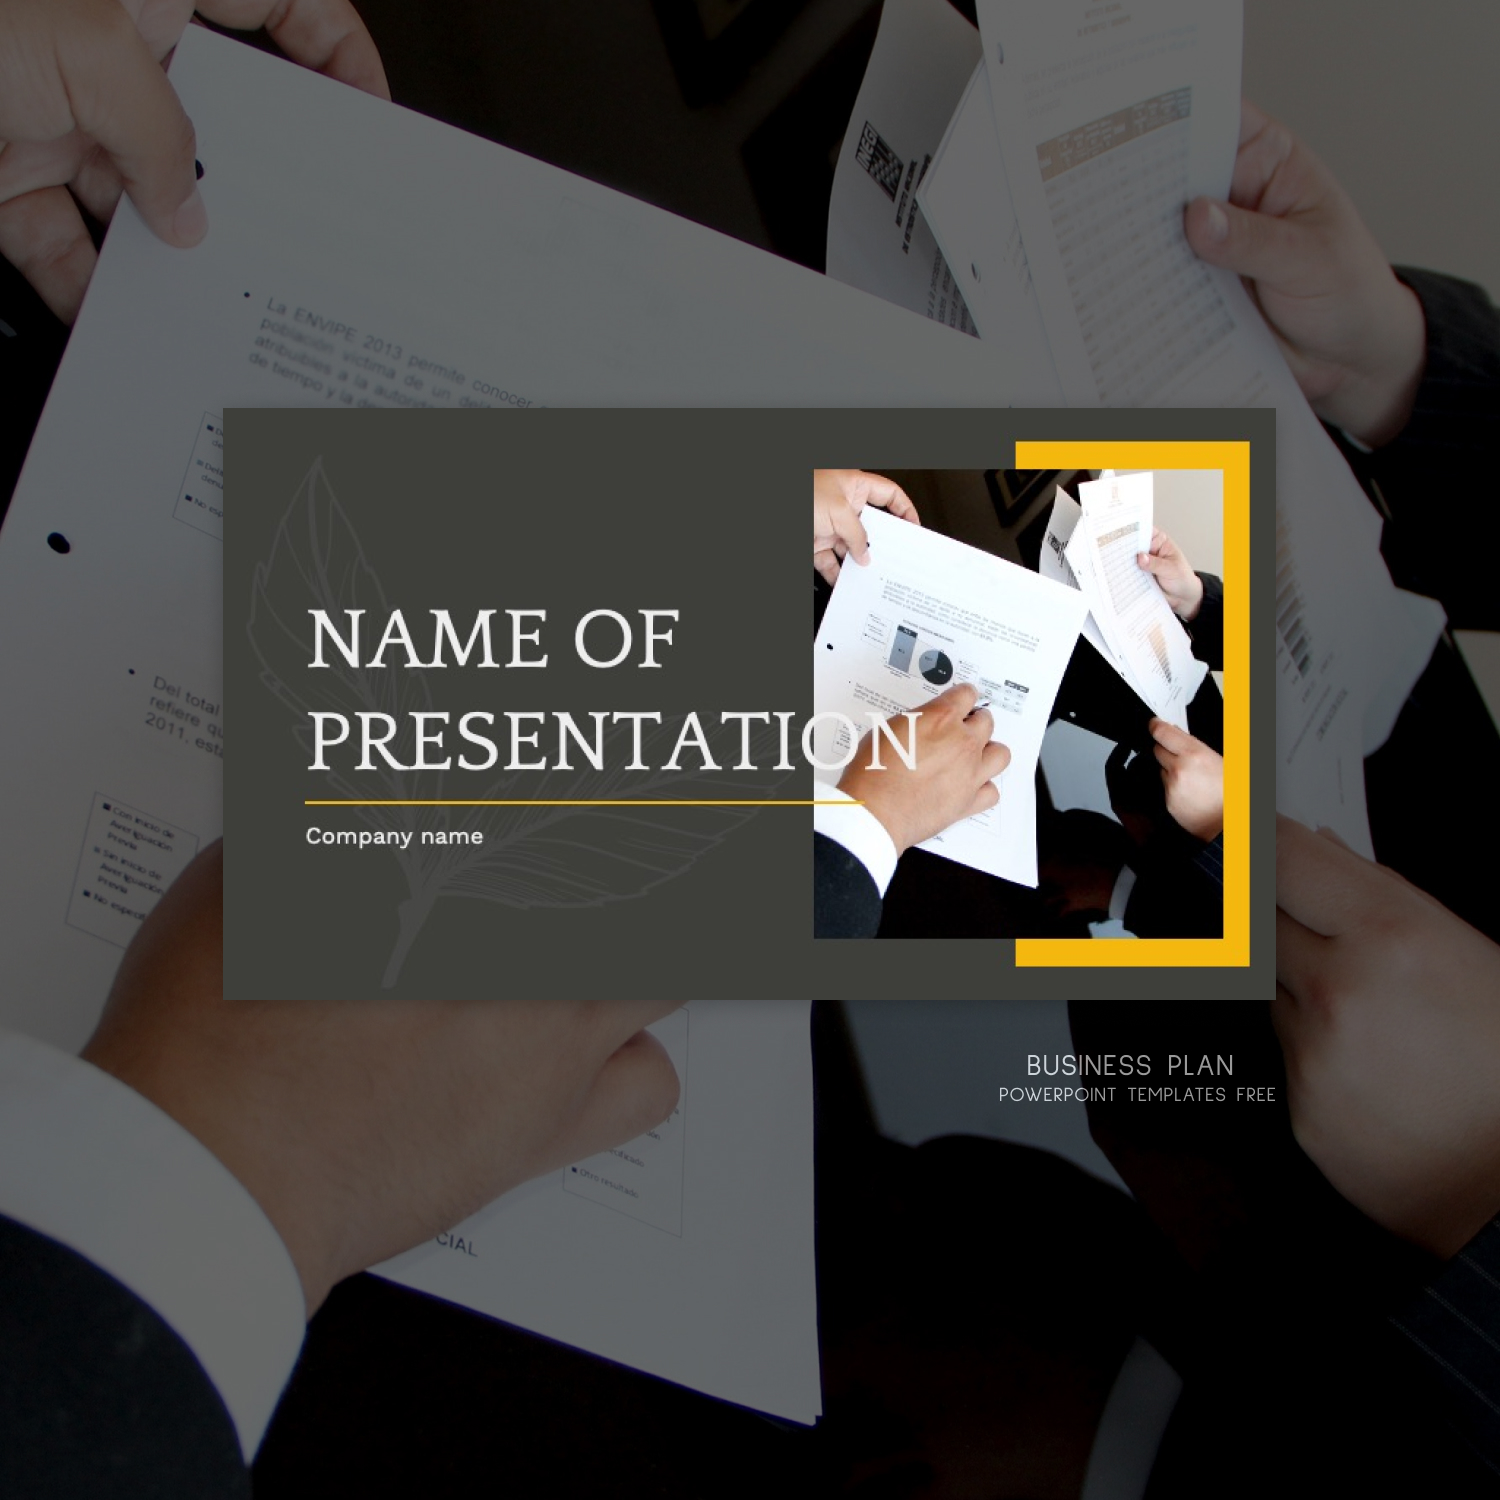 Prints of business plan powerpoint templates.